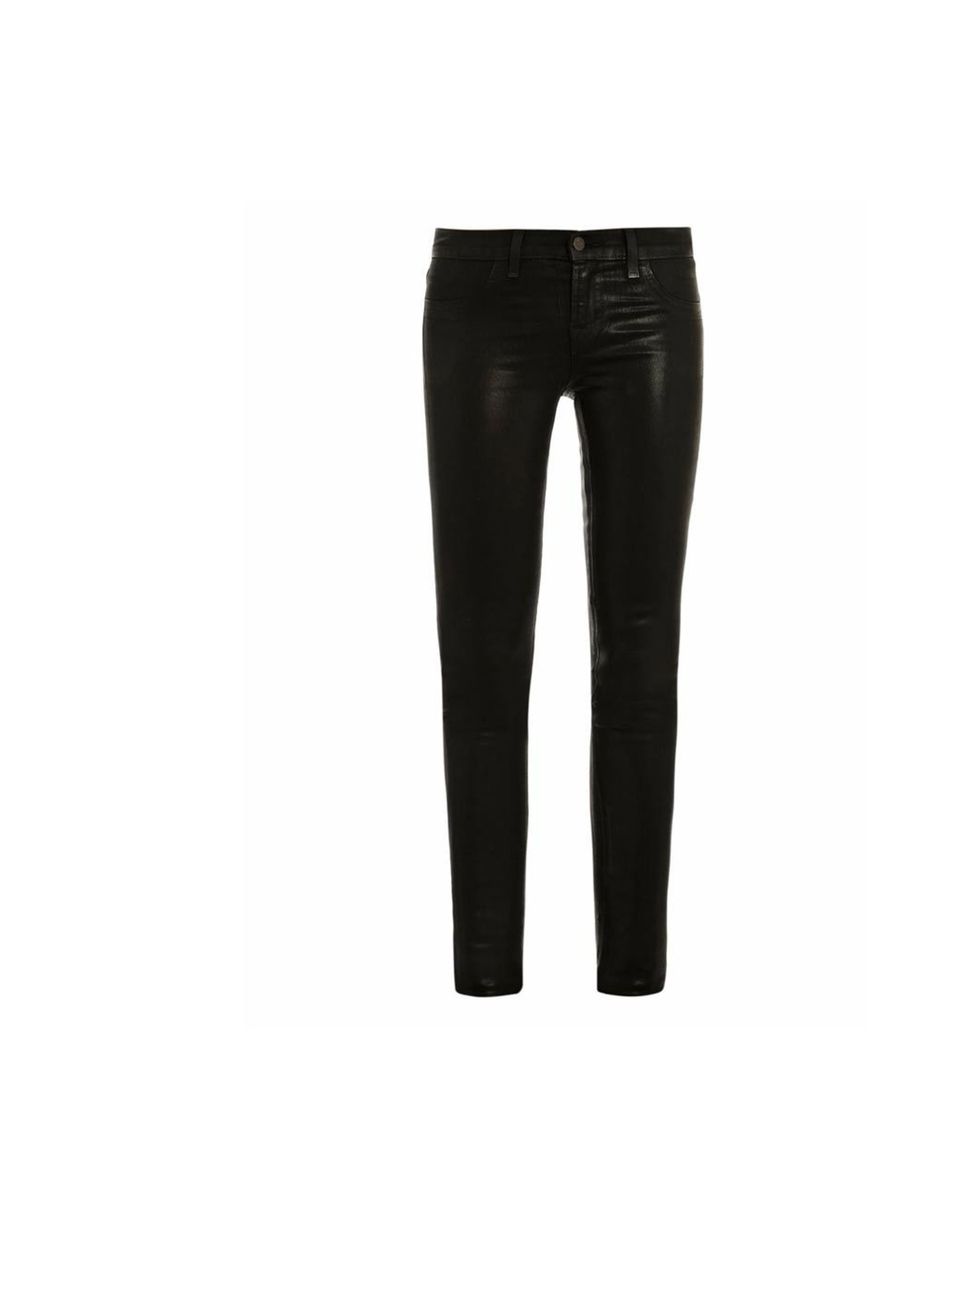 <p>J Brand coated low-rise skinny 'Stealth' jeans, £230, at <a href="http://www.matchesfashion.com/product/134952">Matches Fashion</a></p>